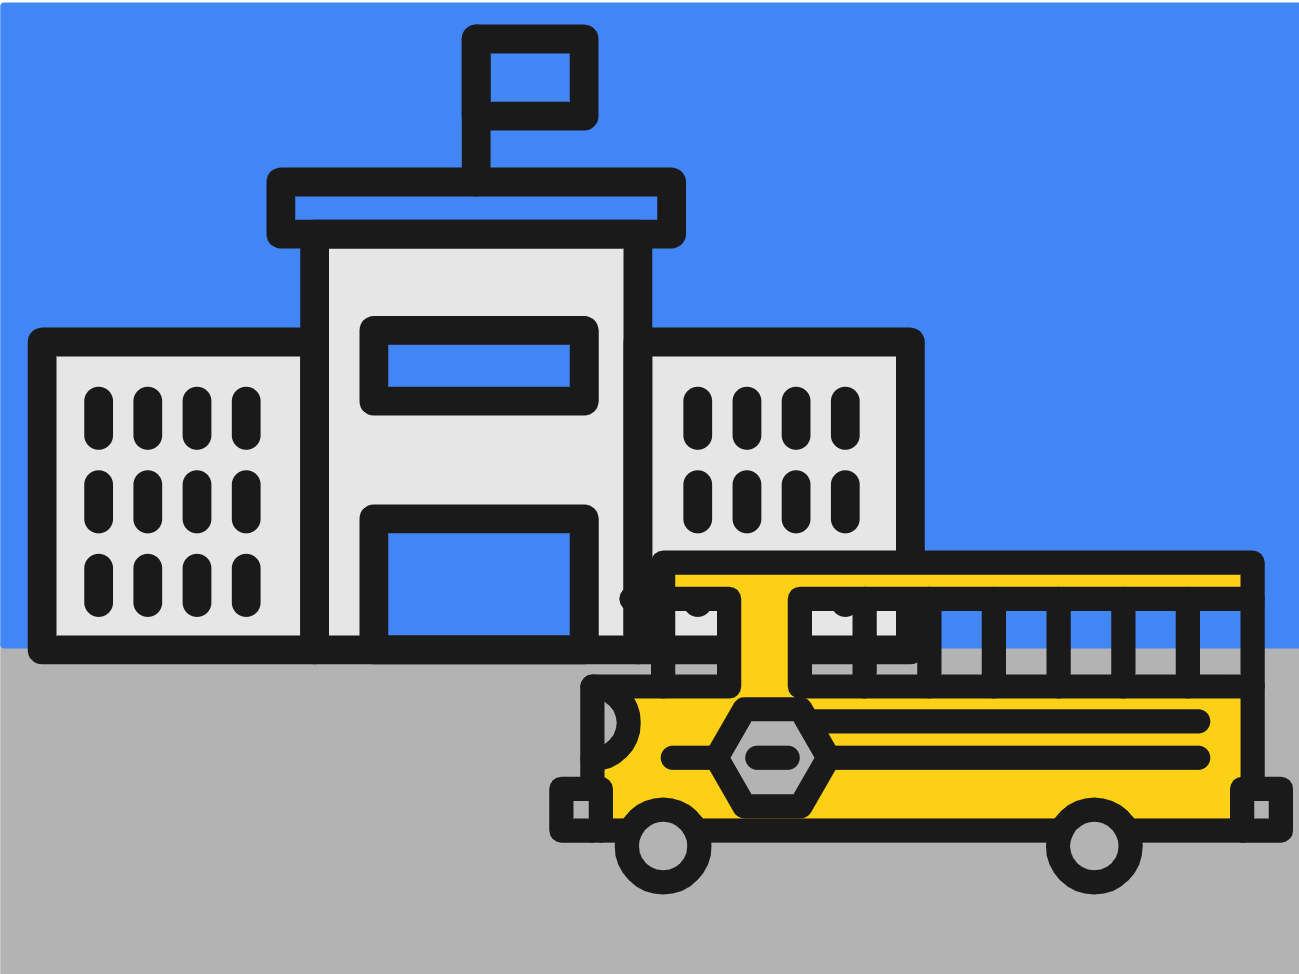 AutoDraw sketch of a yellow school bus and a building